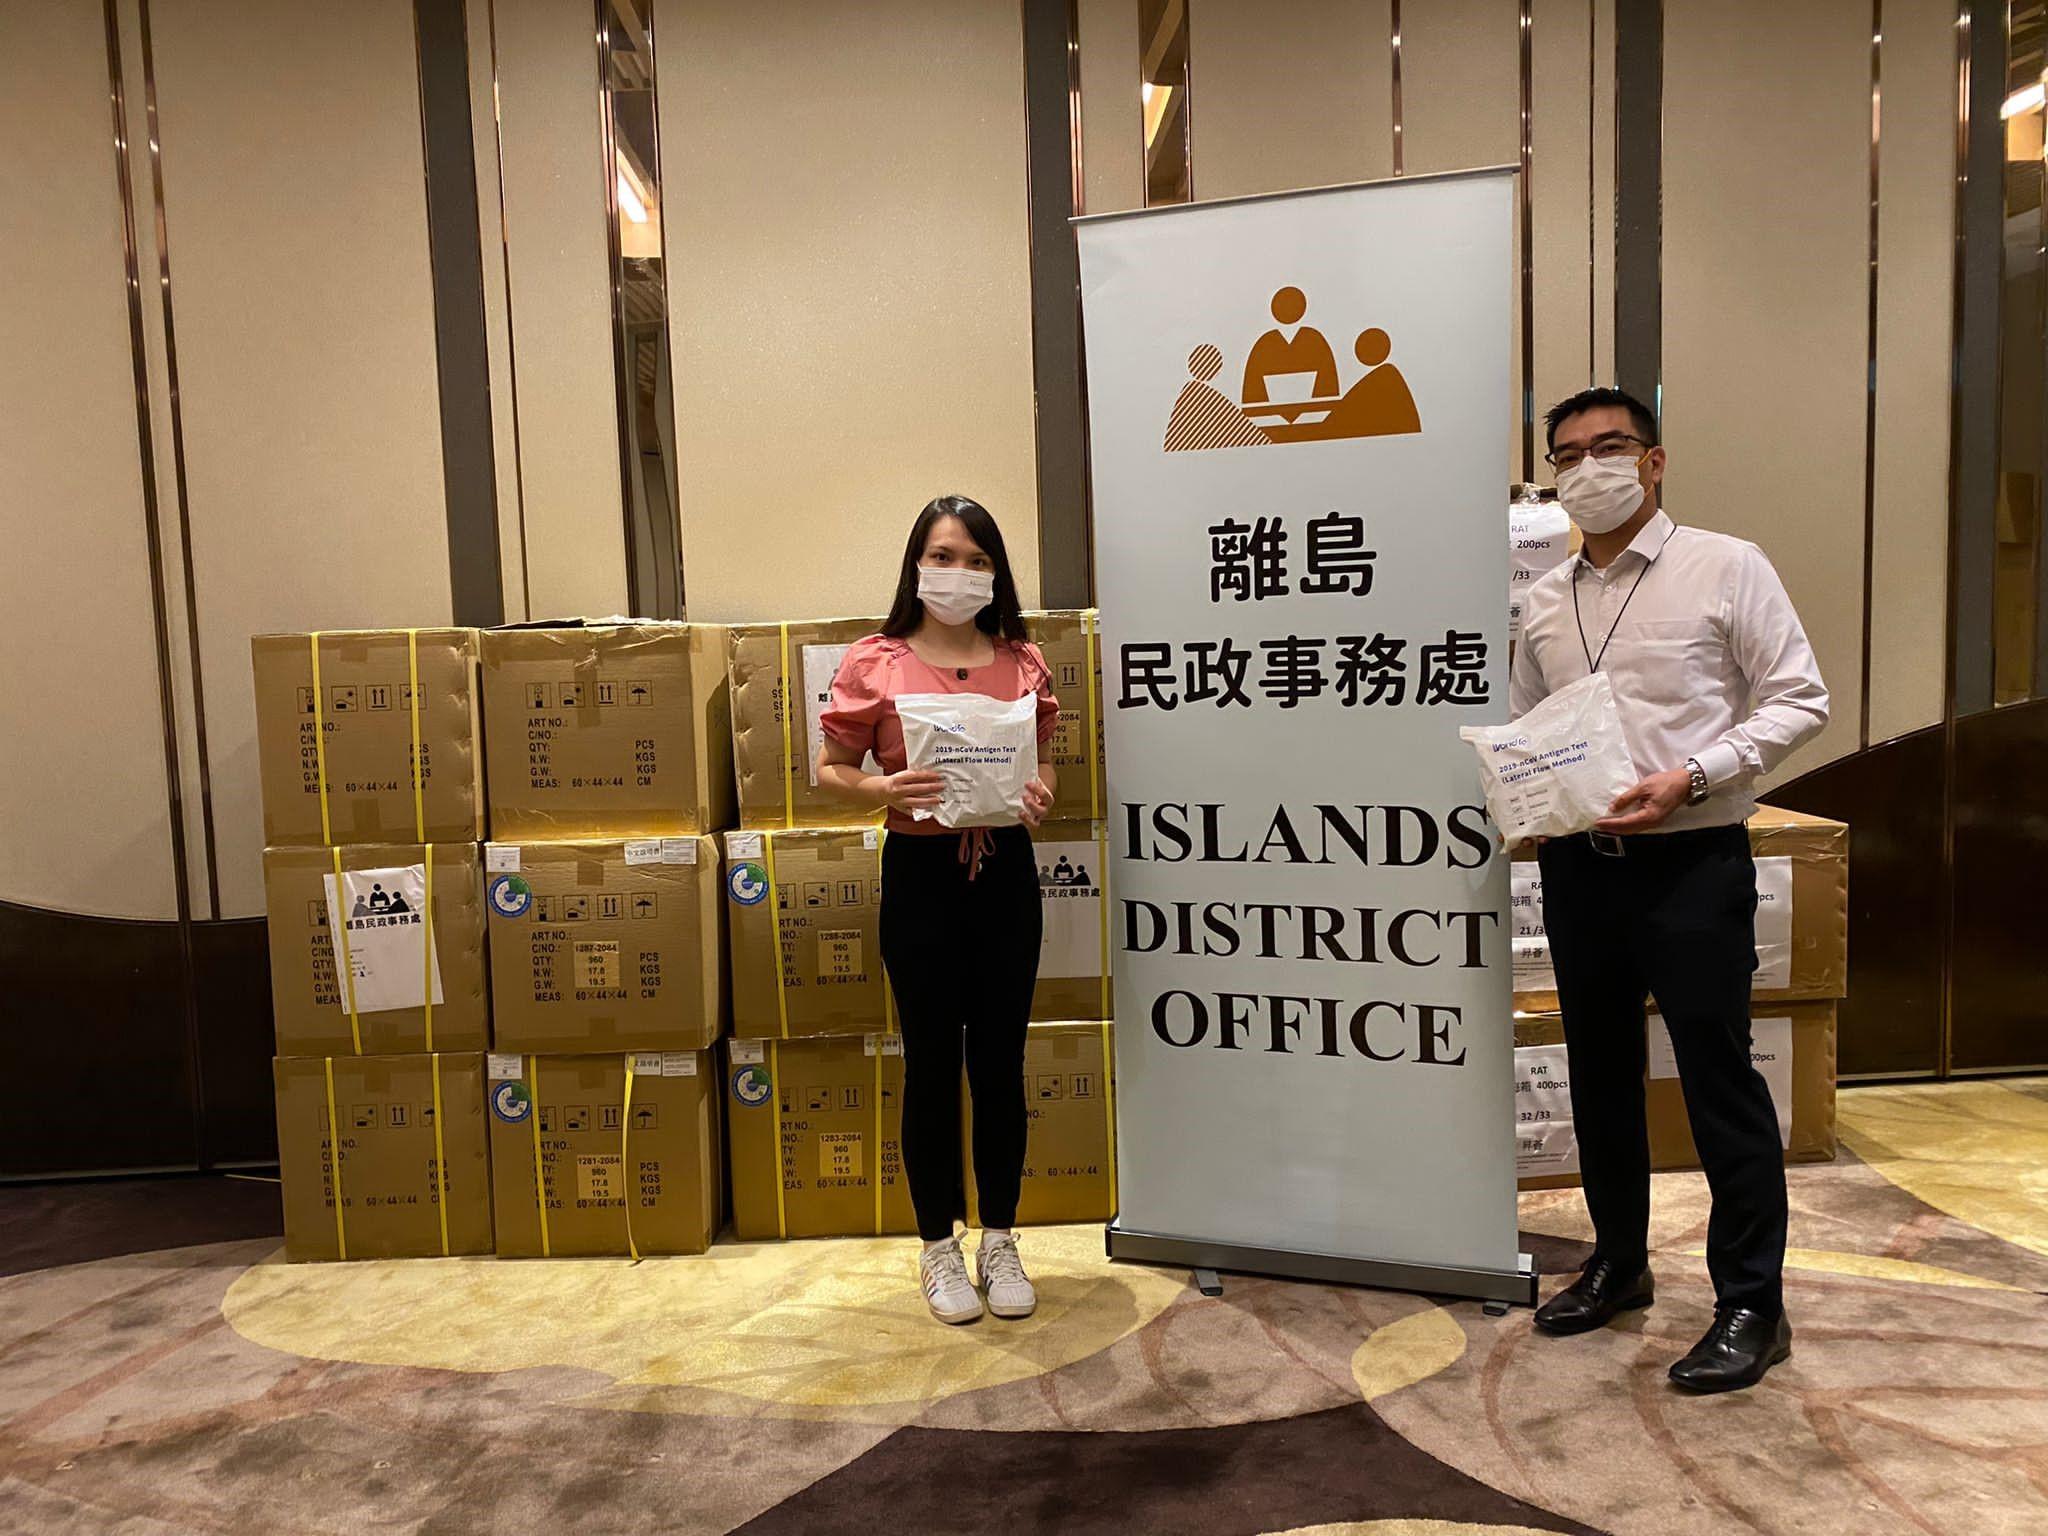 The Islands District Office today (June 14) distributed COVID-19 rapid test kits to households, cleansing workers and property management staff living and working in The Visionary for voluntary testing through the property management company.